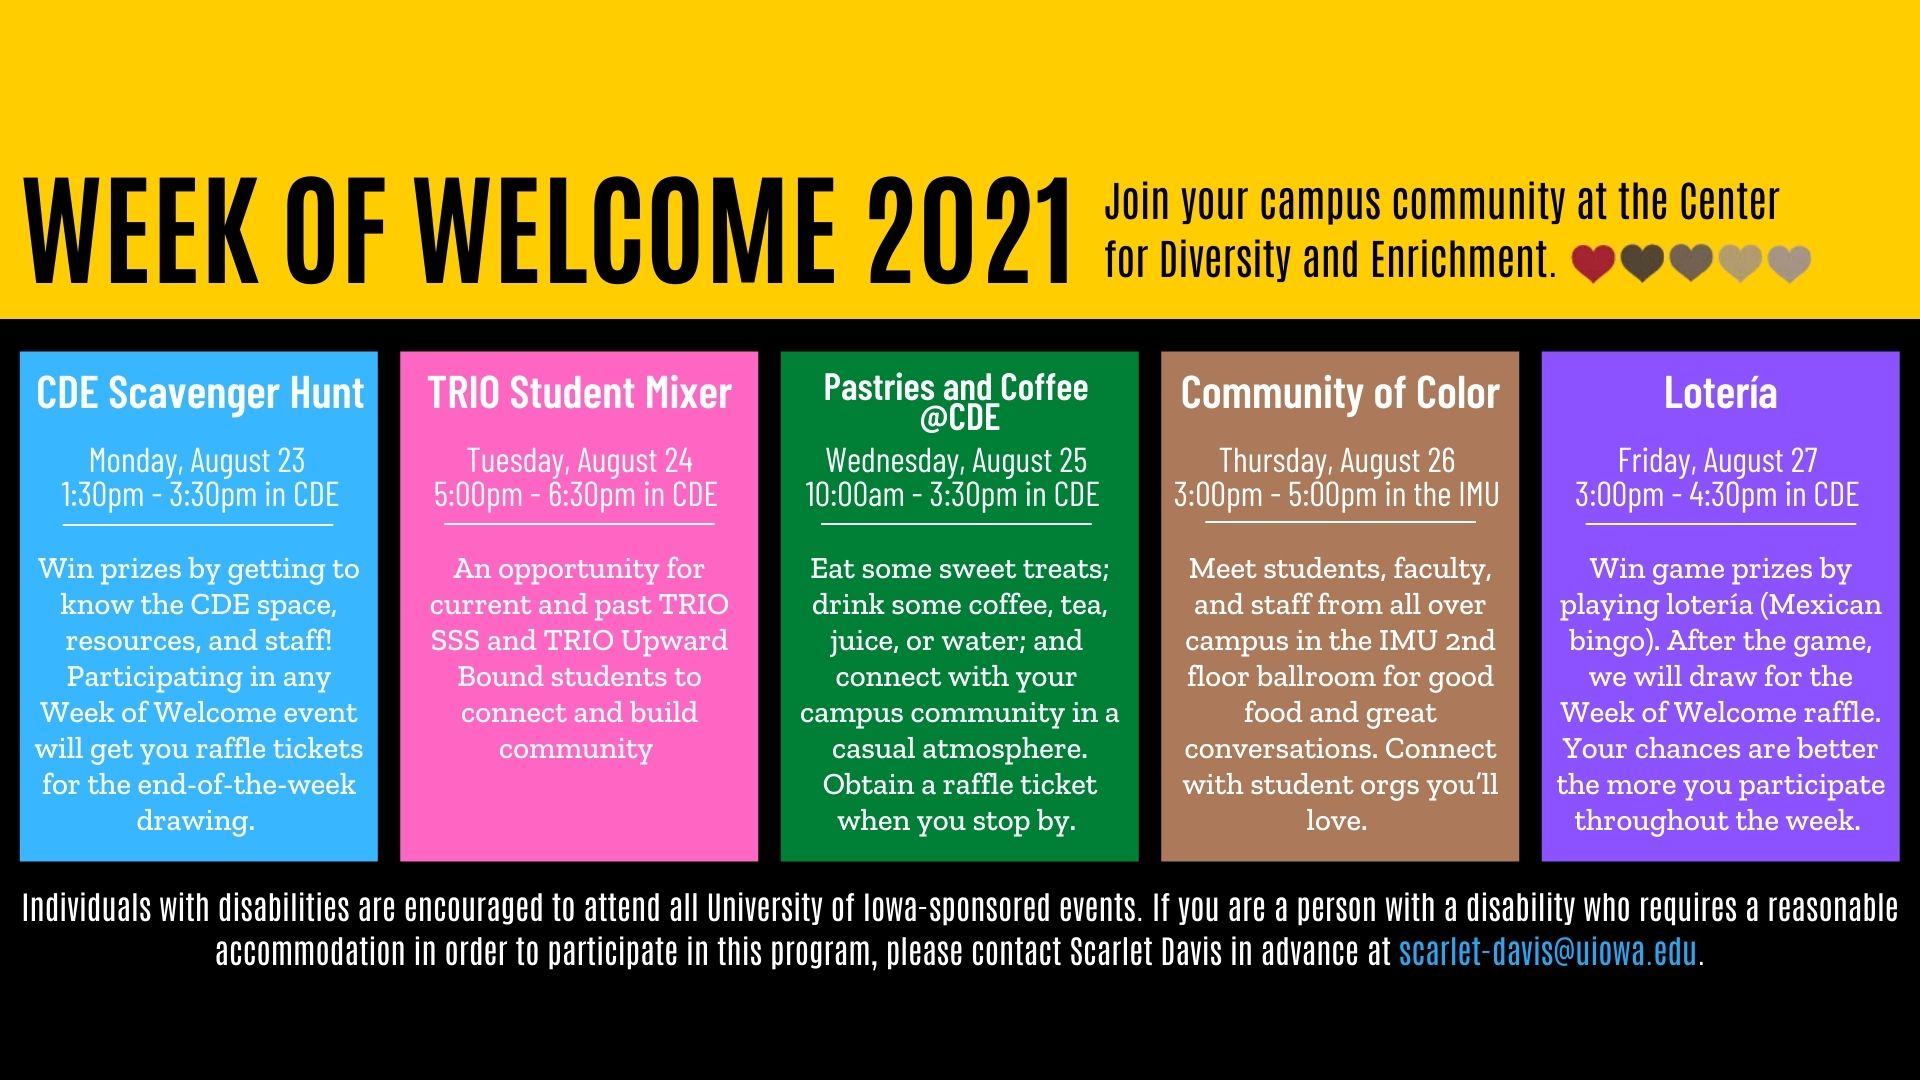 Week of Welcome 2021, hosted by the Center for Diversity and Enrichment